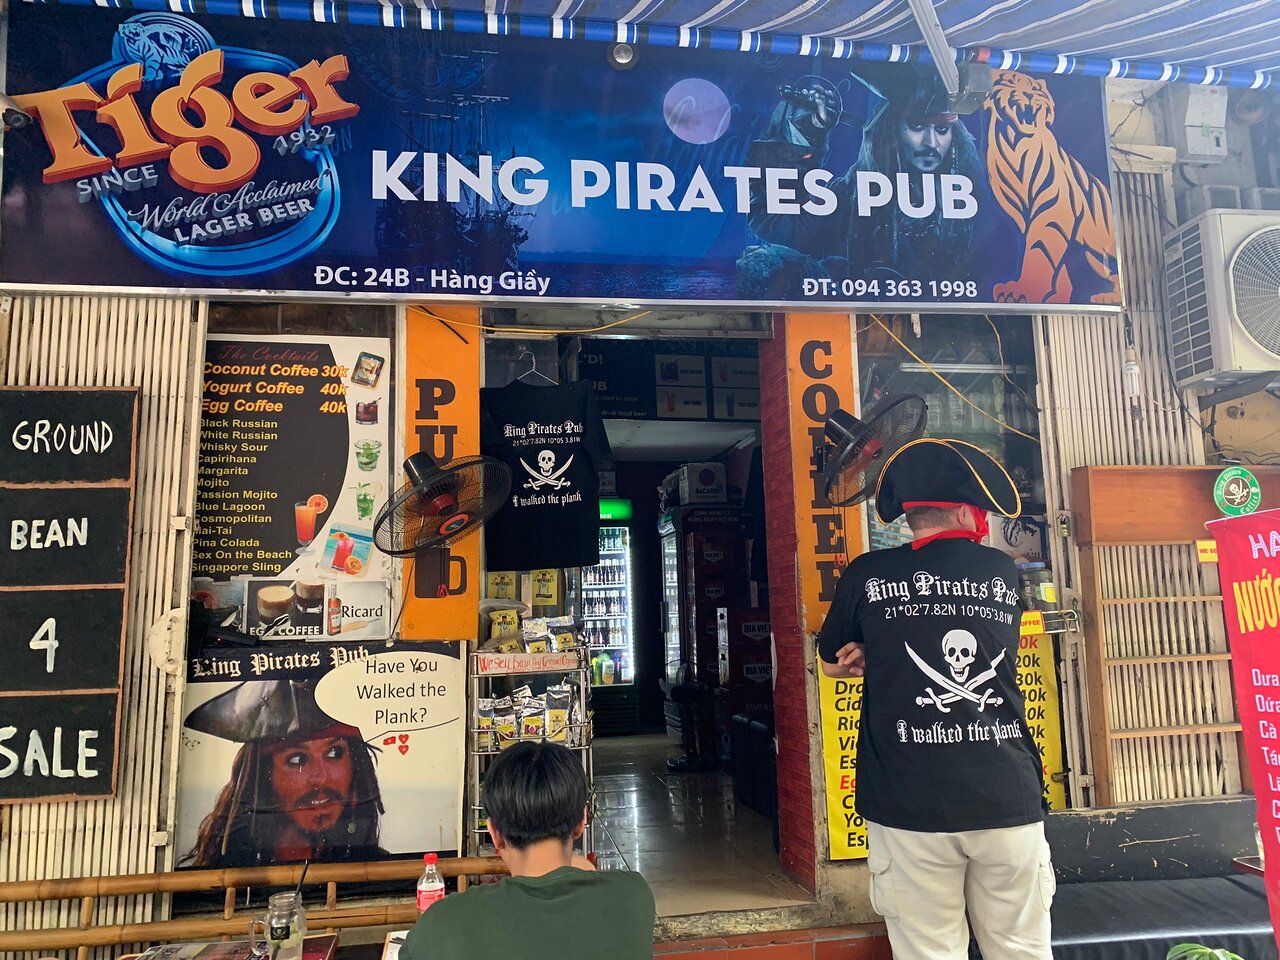 The Pub is inspired by Pirates’ themes